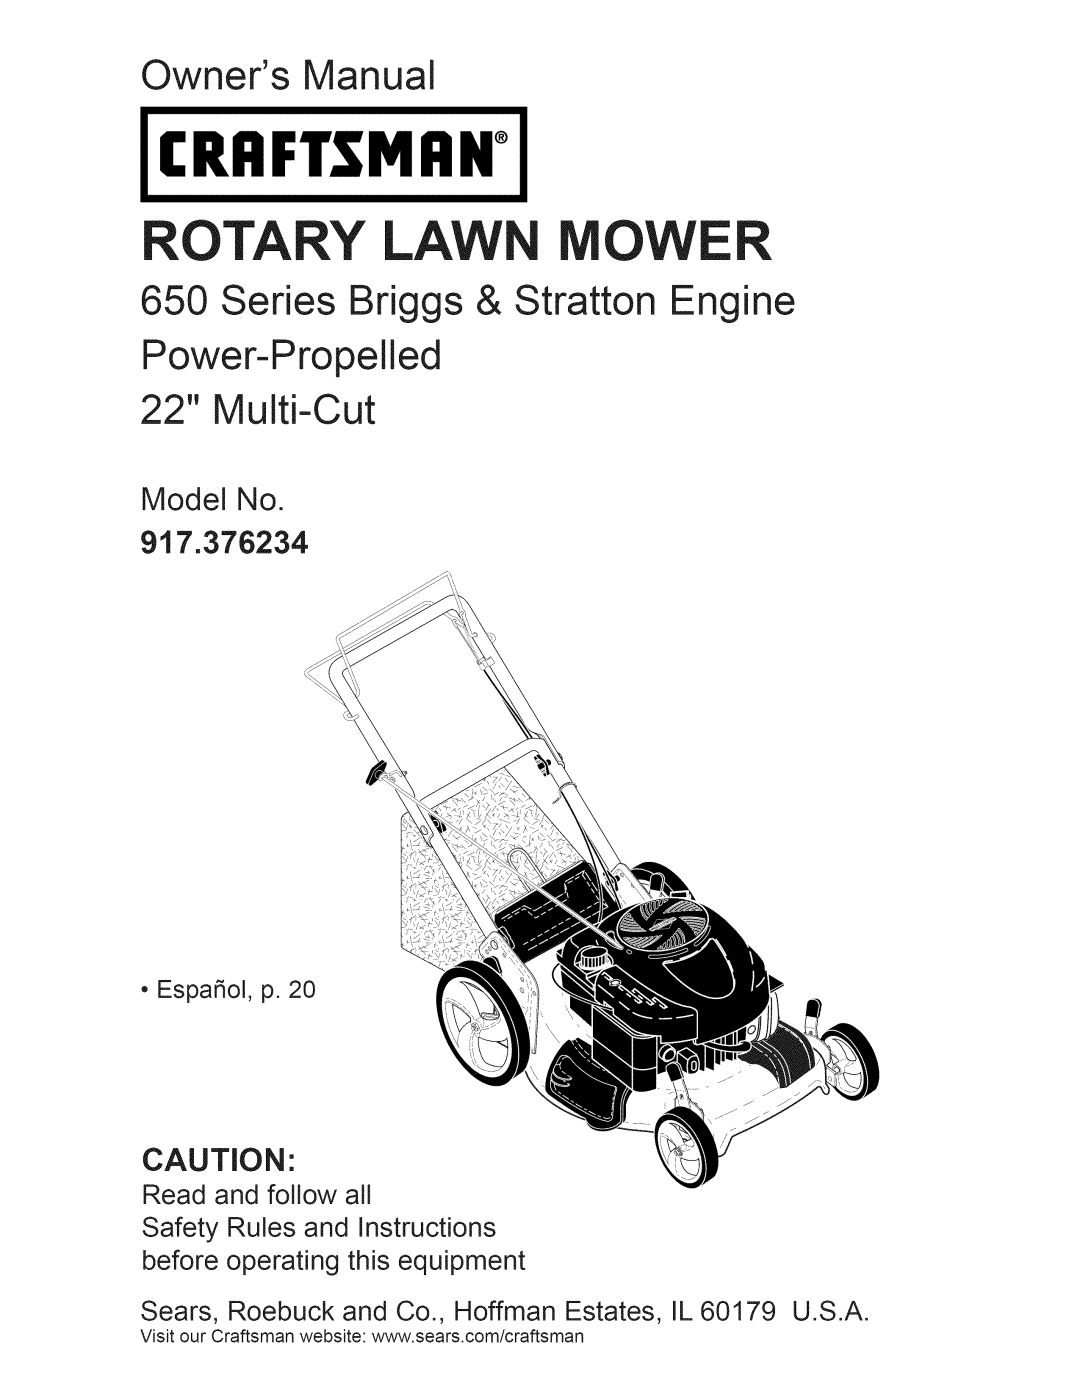 Craftsman manual Model No 917.376234, Craftsman, Rotary Lawn Mower, Owners Manual, Series Briggs & Stratton Engine 